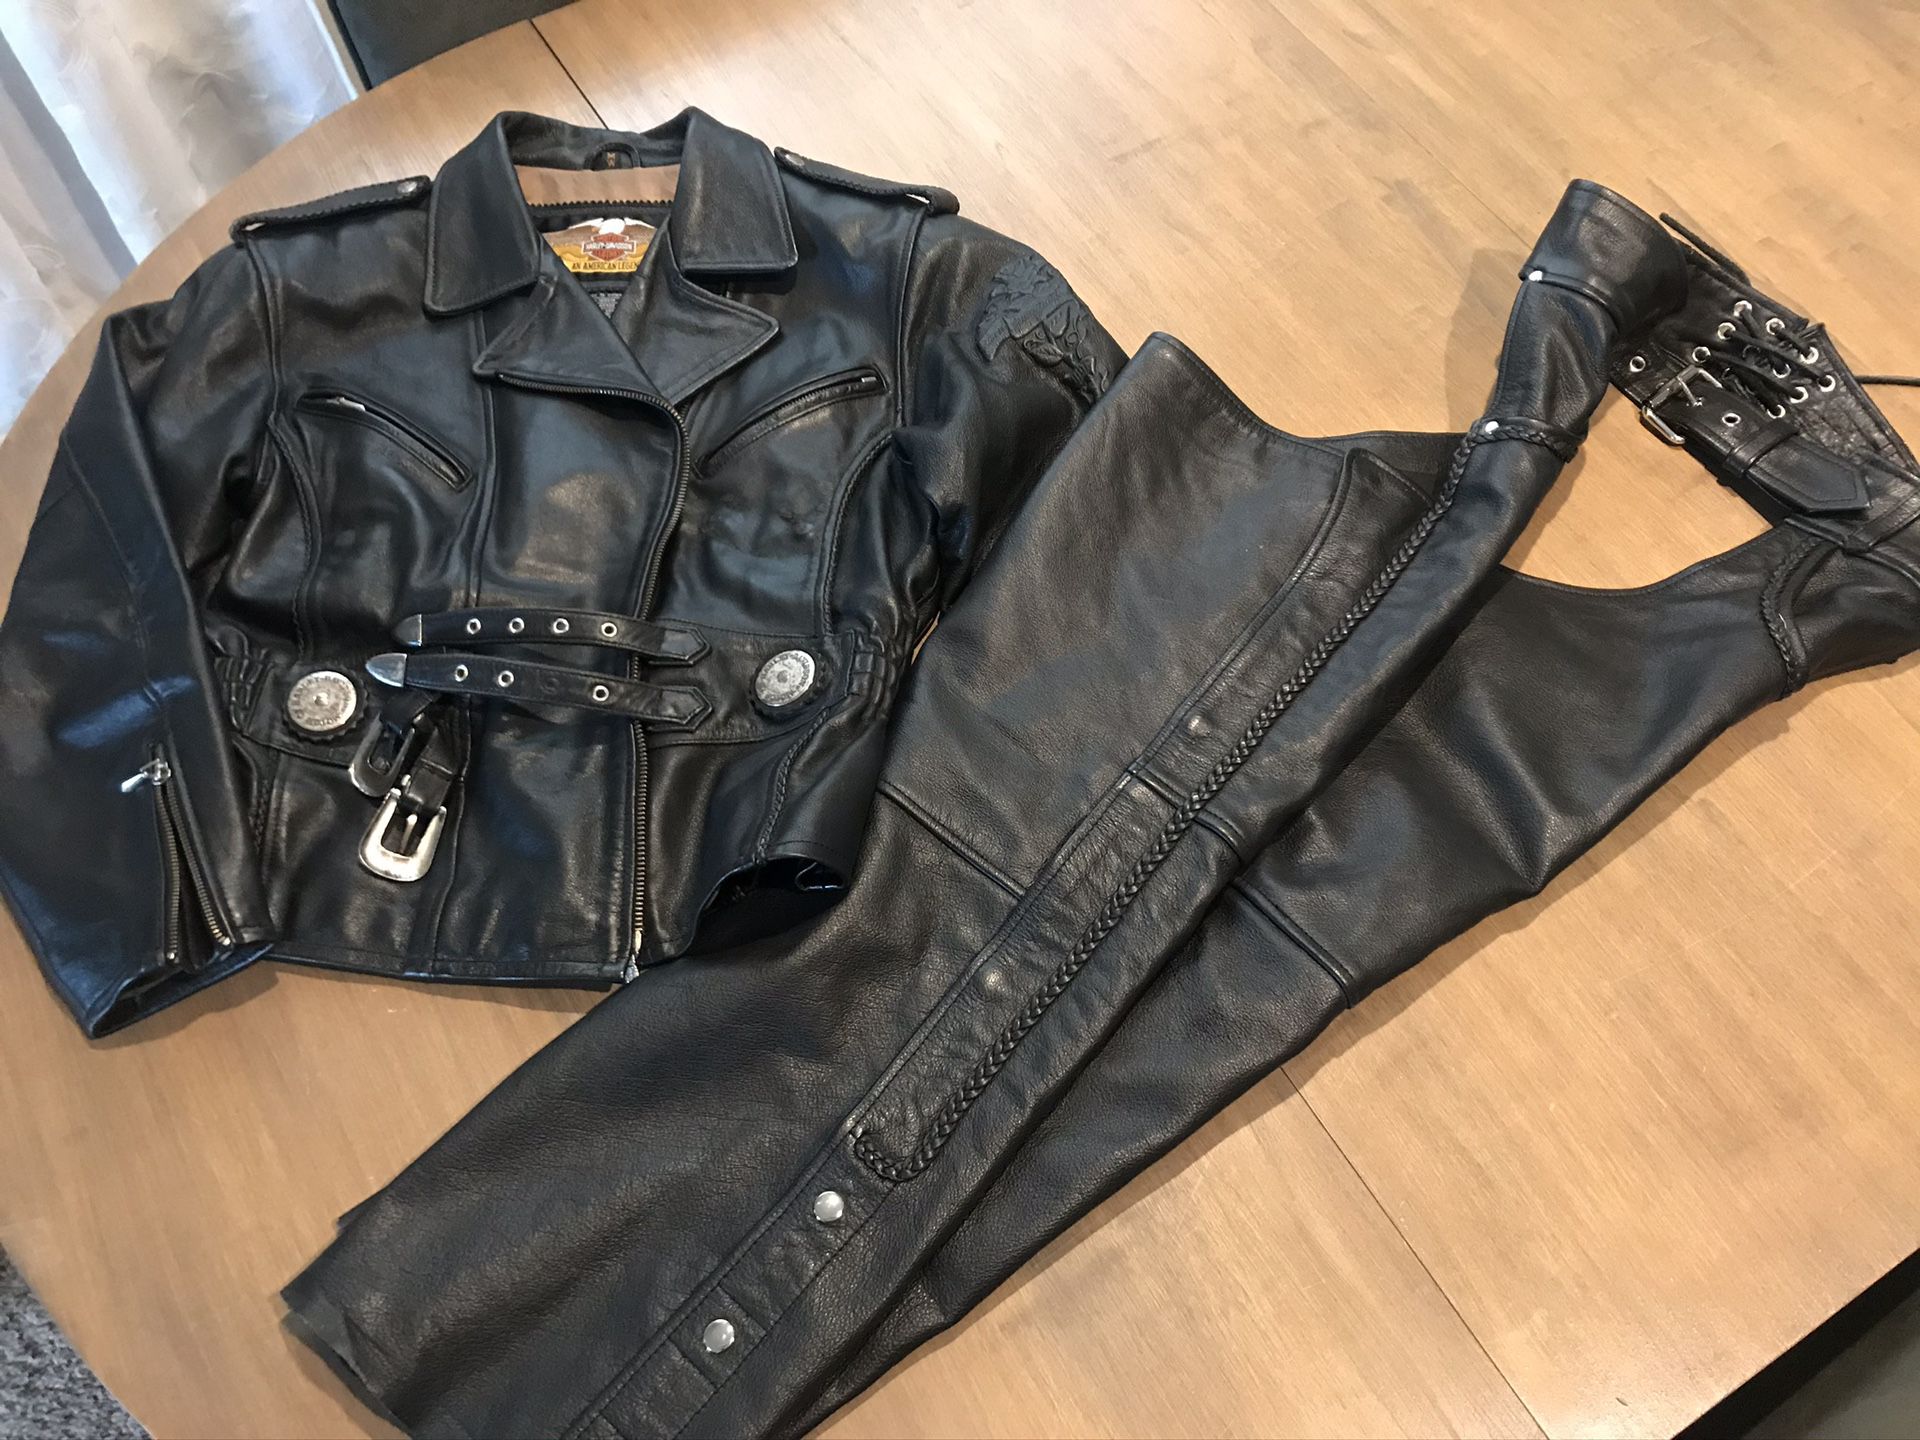 Harley Davidson Riding Jacket and Eagle Chaps (both leather) OBO